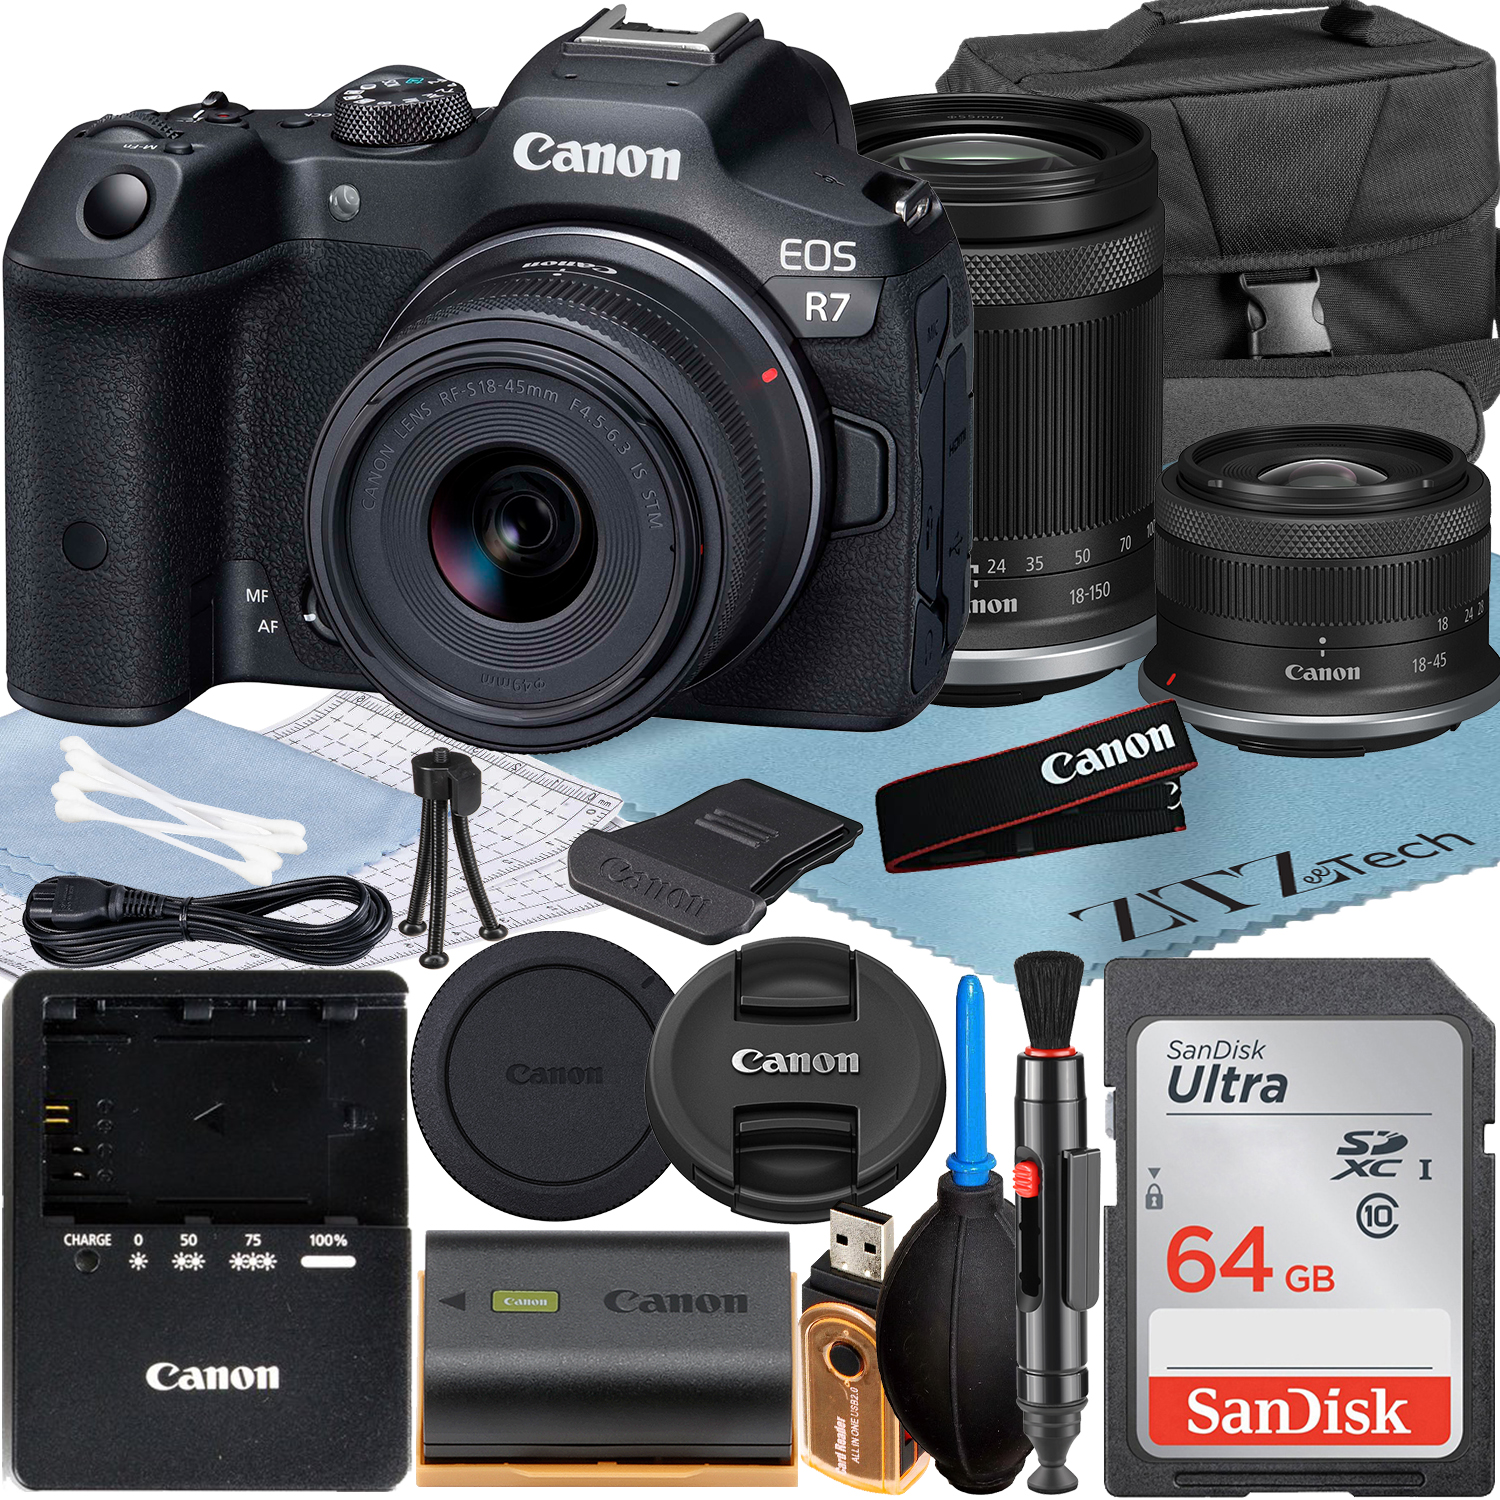 Canon EOS R7 Mirrorless Camera with RF-S 18-45mm + 18-150mm Lens + SanDisk 64GB Memory Card + Case + ZeeTech Accessory Bundle